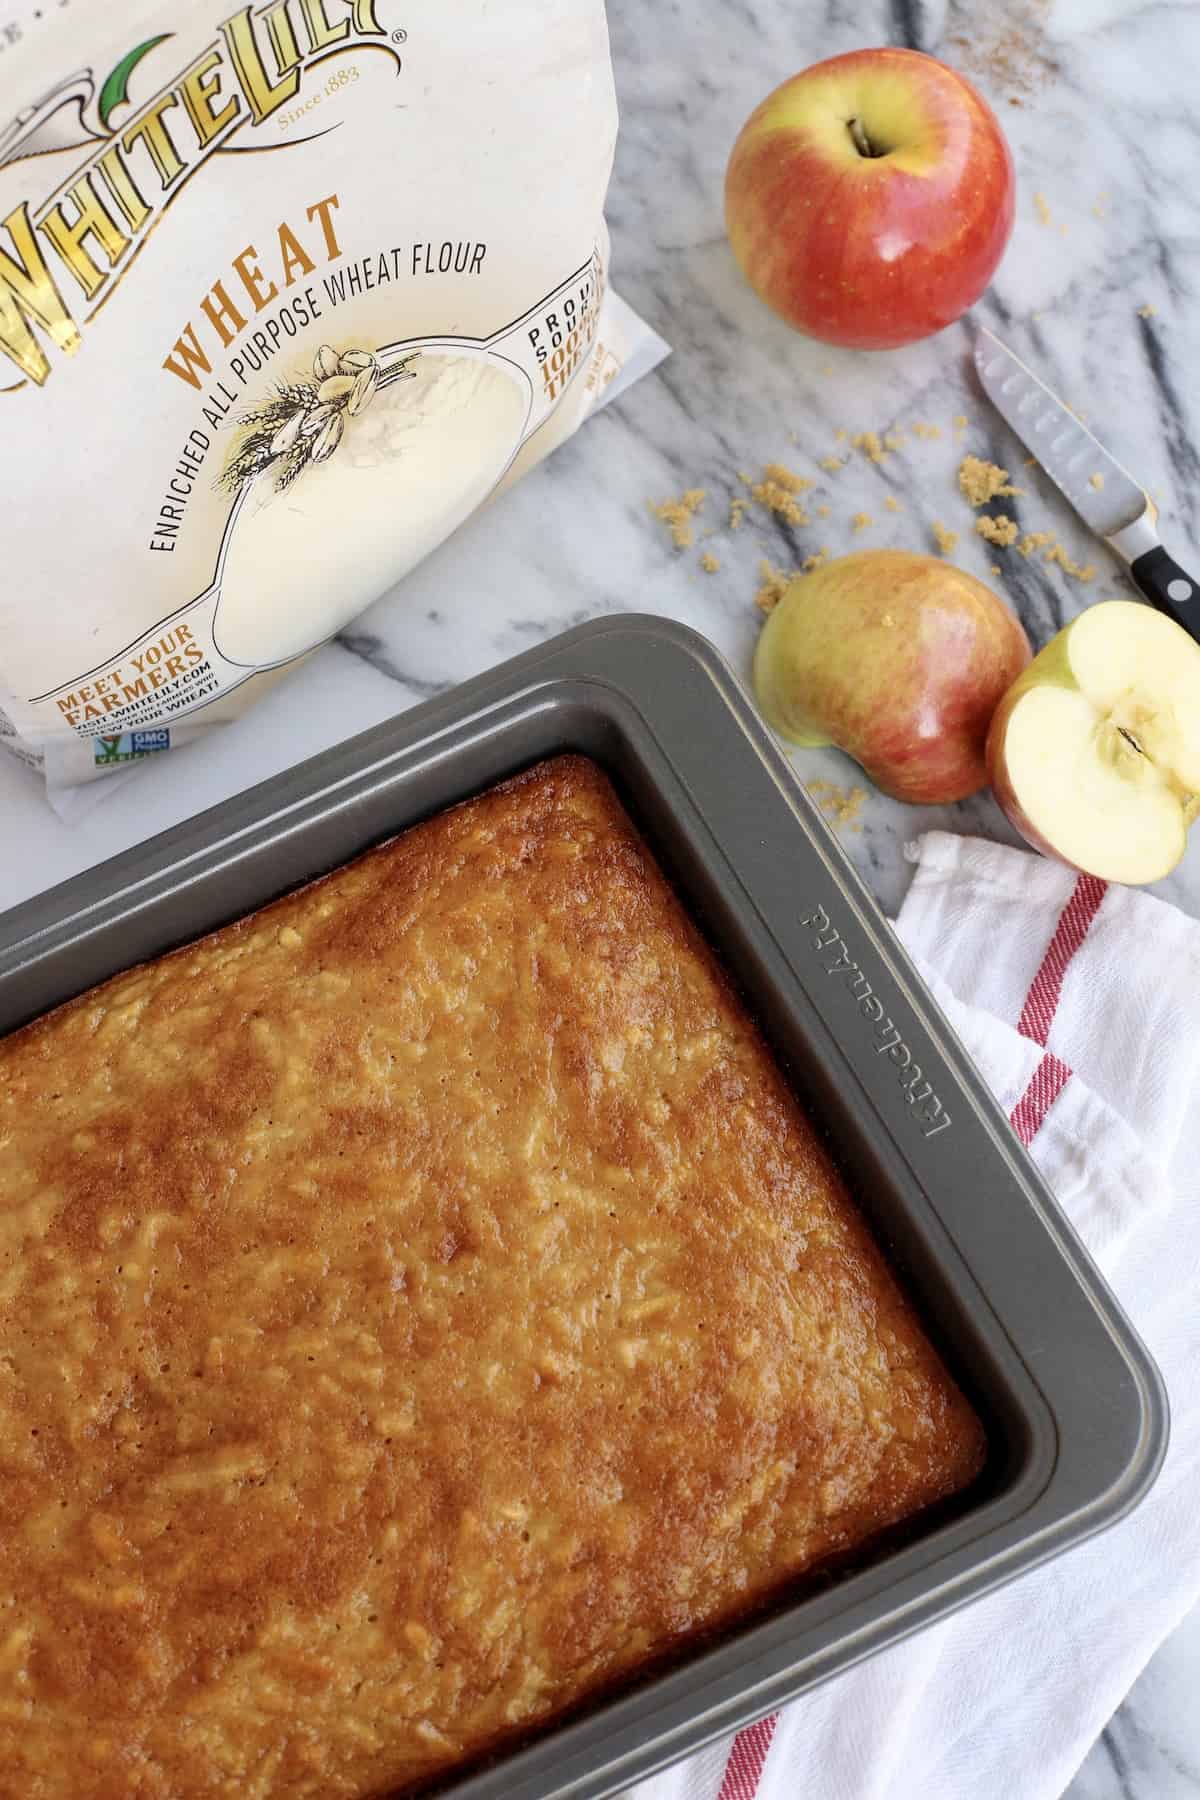 Unfrosted apple cake in a pan next to a bag of flour and apples